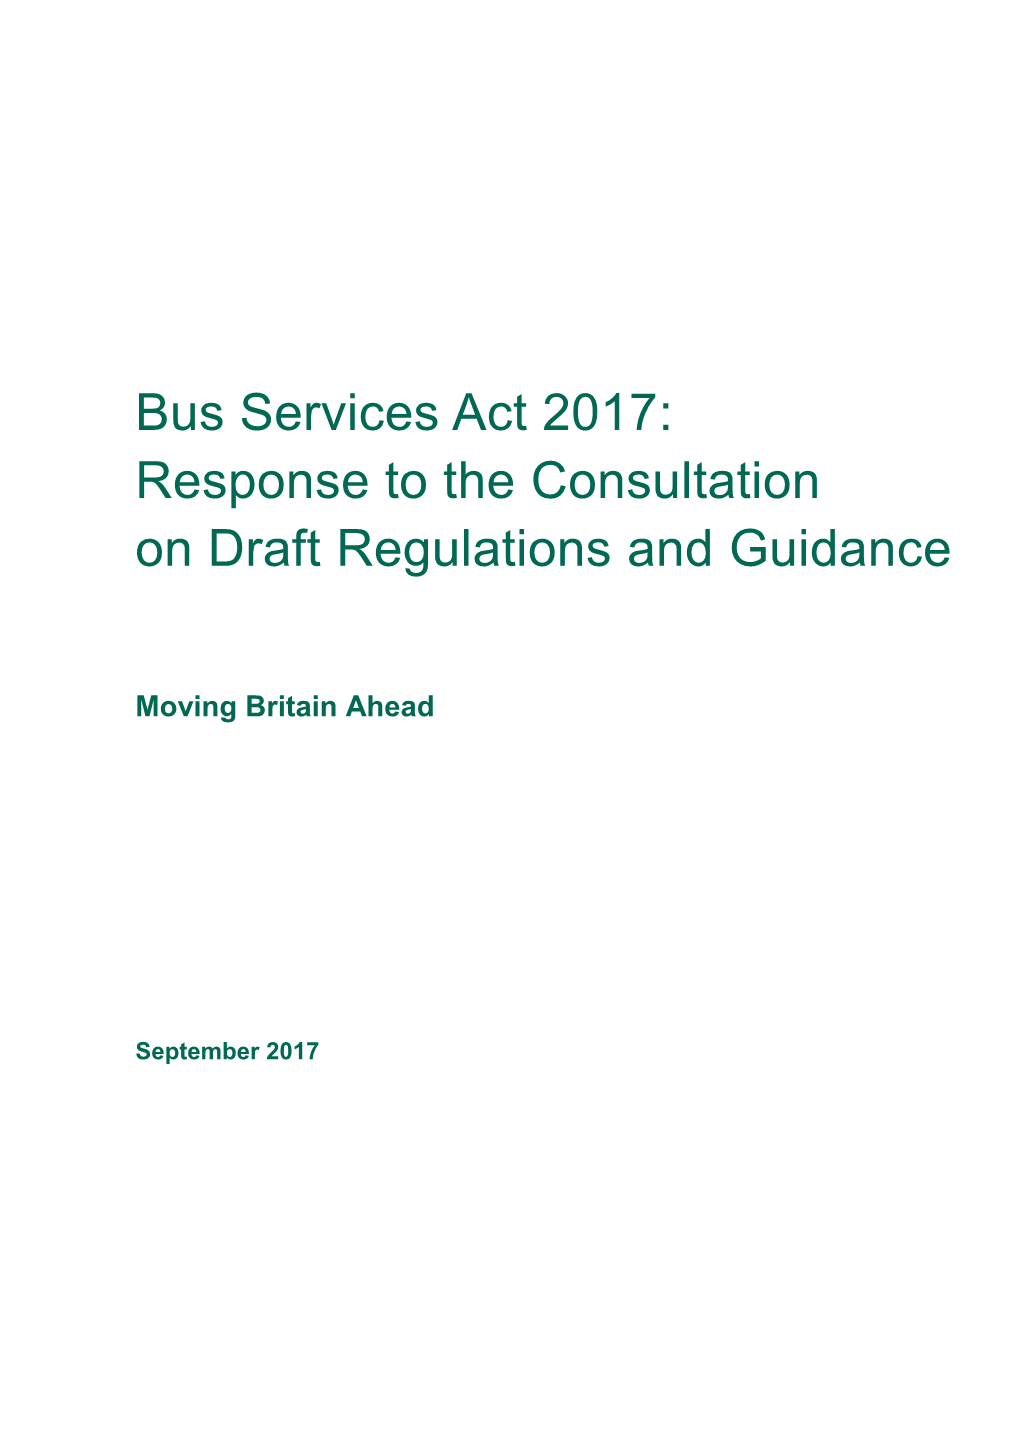 Bus Services Act 2017: Response to the Consultation on Draft Regulations and Guidance